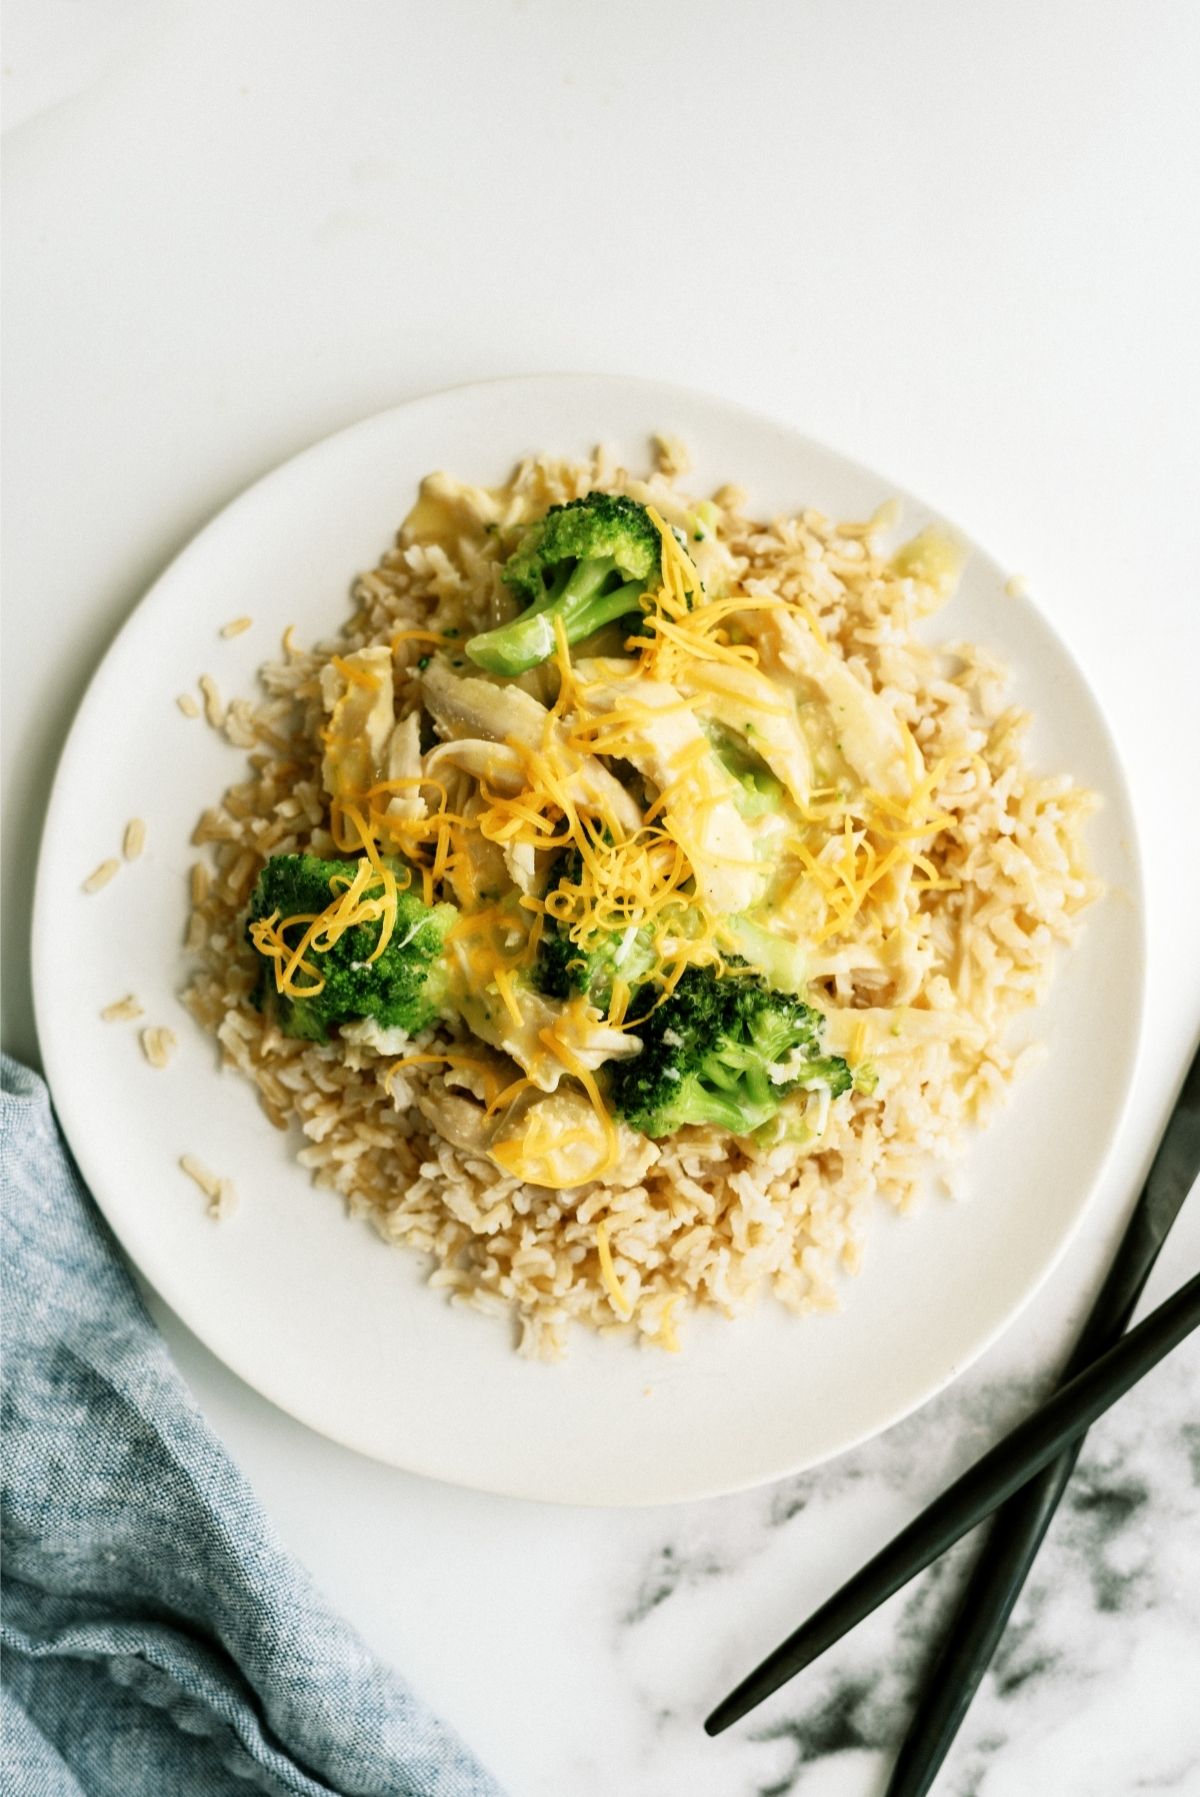 Slow Cooker Chicken and Broccoli over Rice Recipe